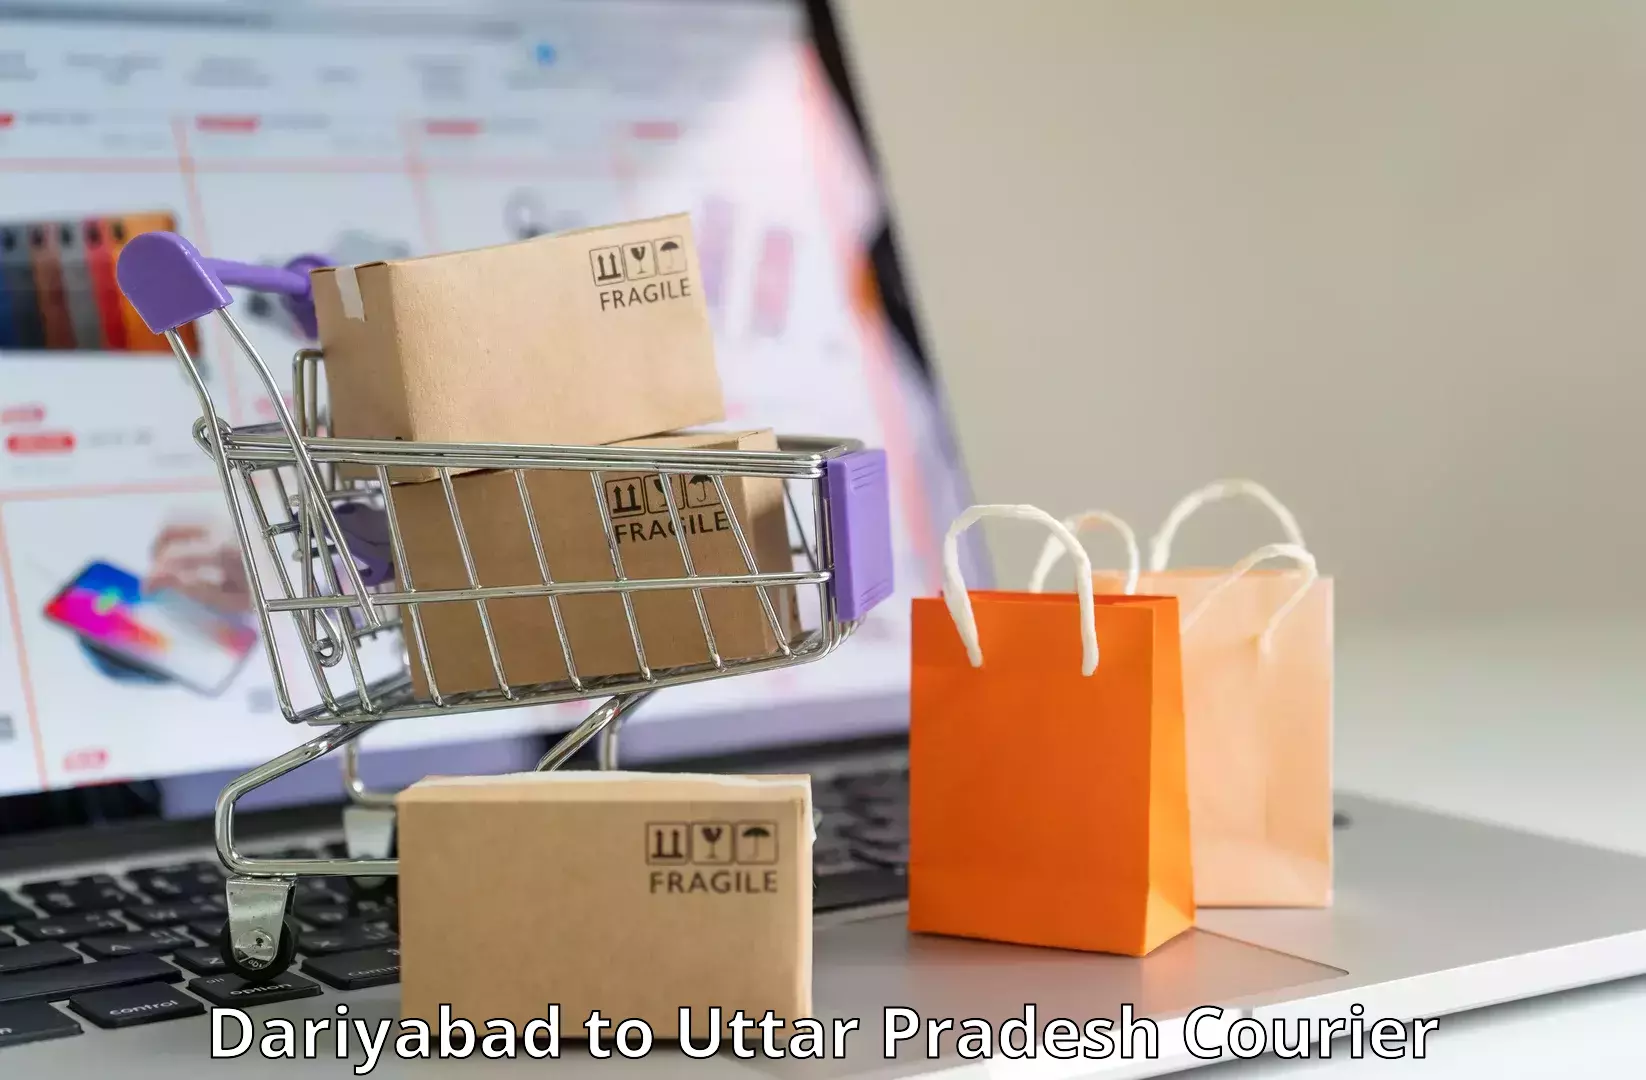 Package delivery network Dariyabad to Sultanpur Avadh